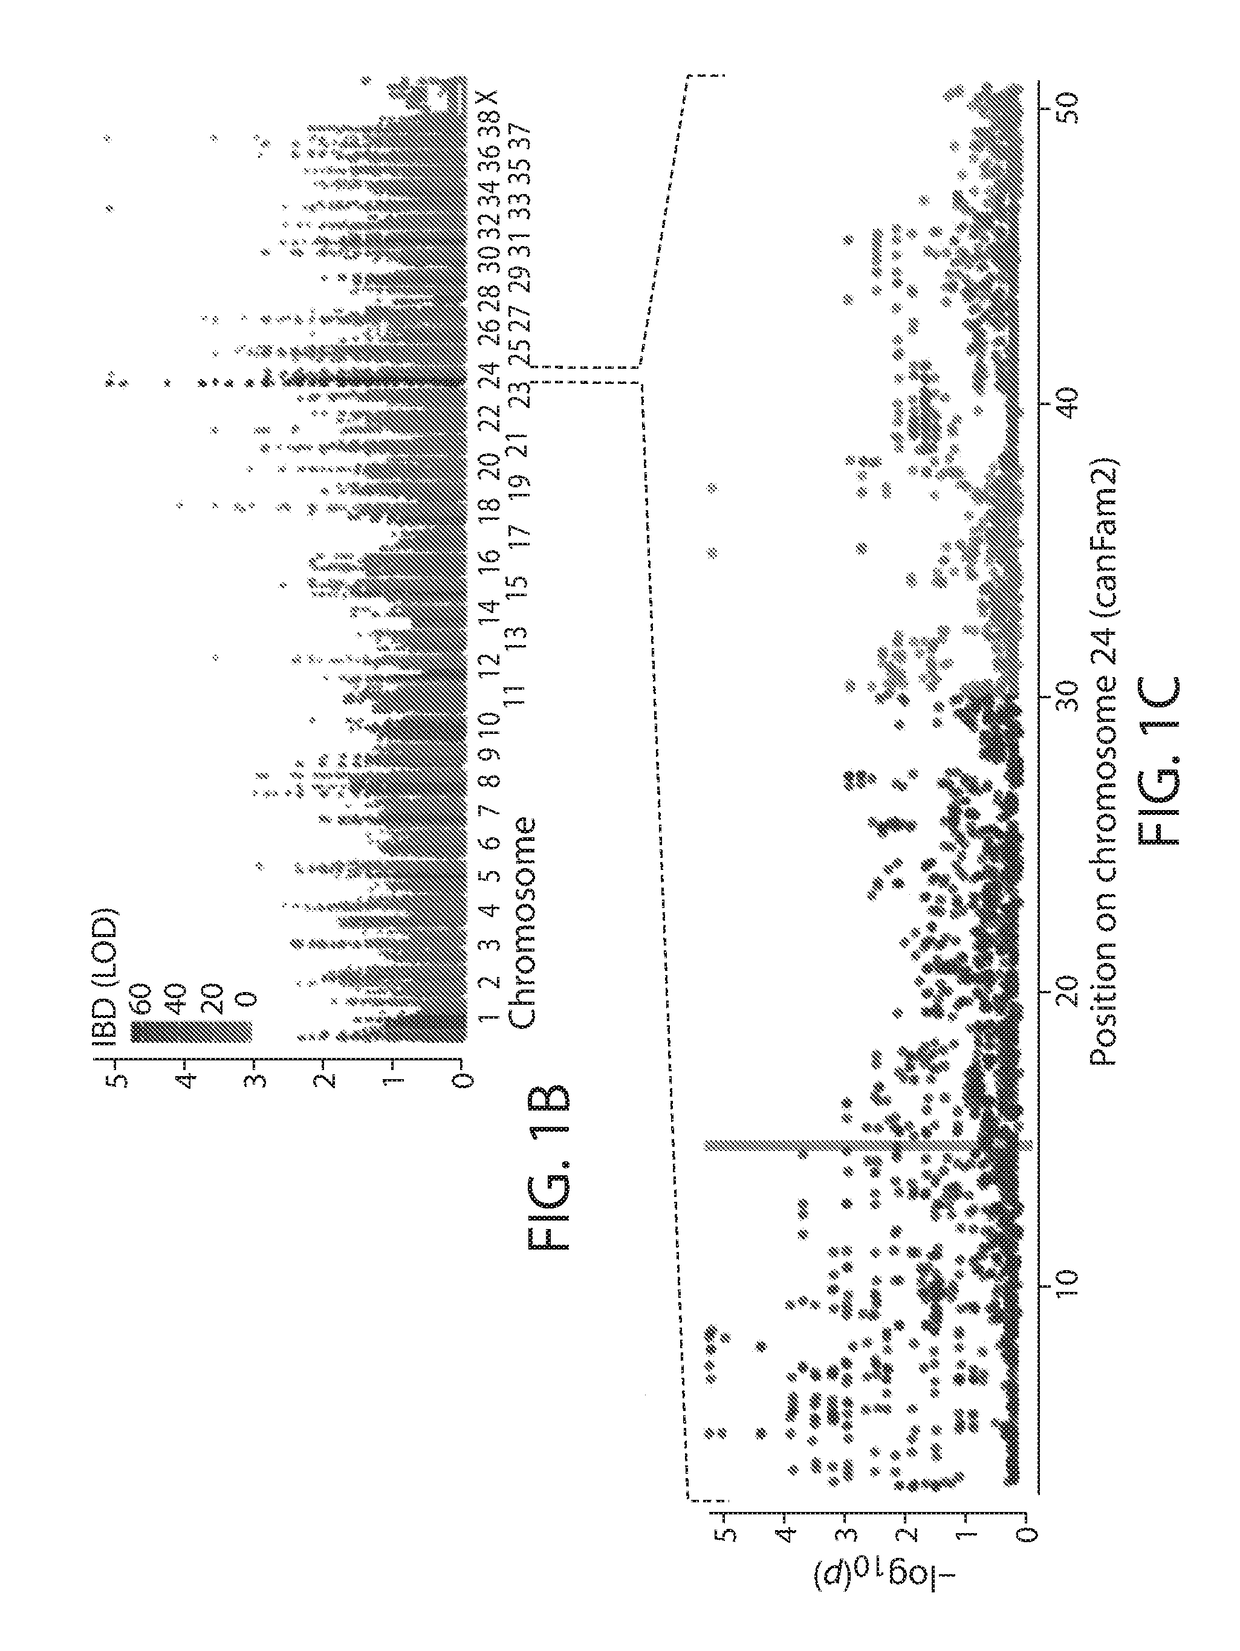 Compositions and methods of treating muscular dystrophy